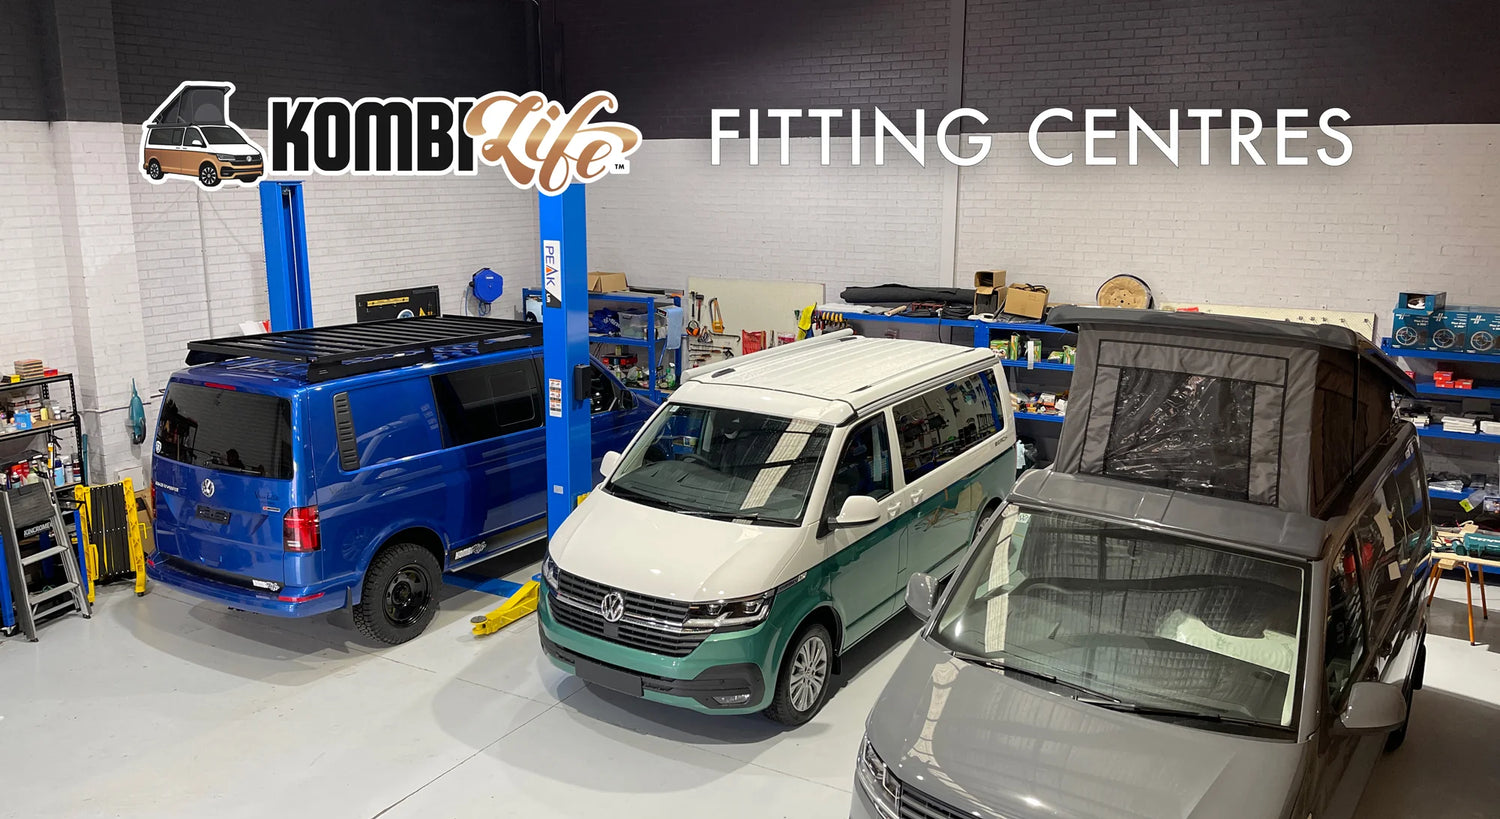 Fitting Centres